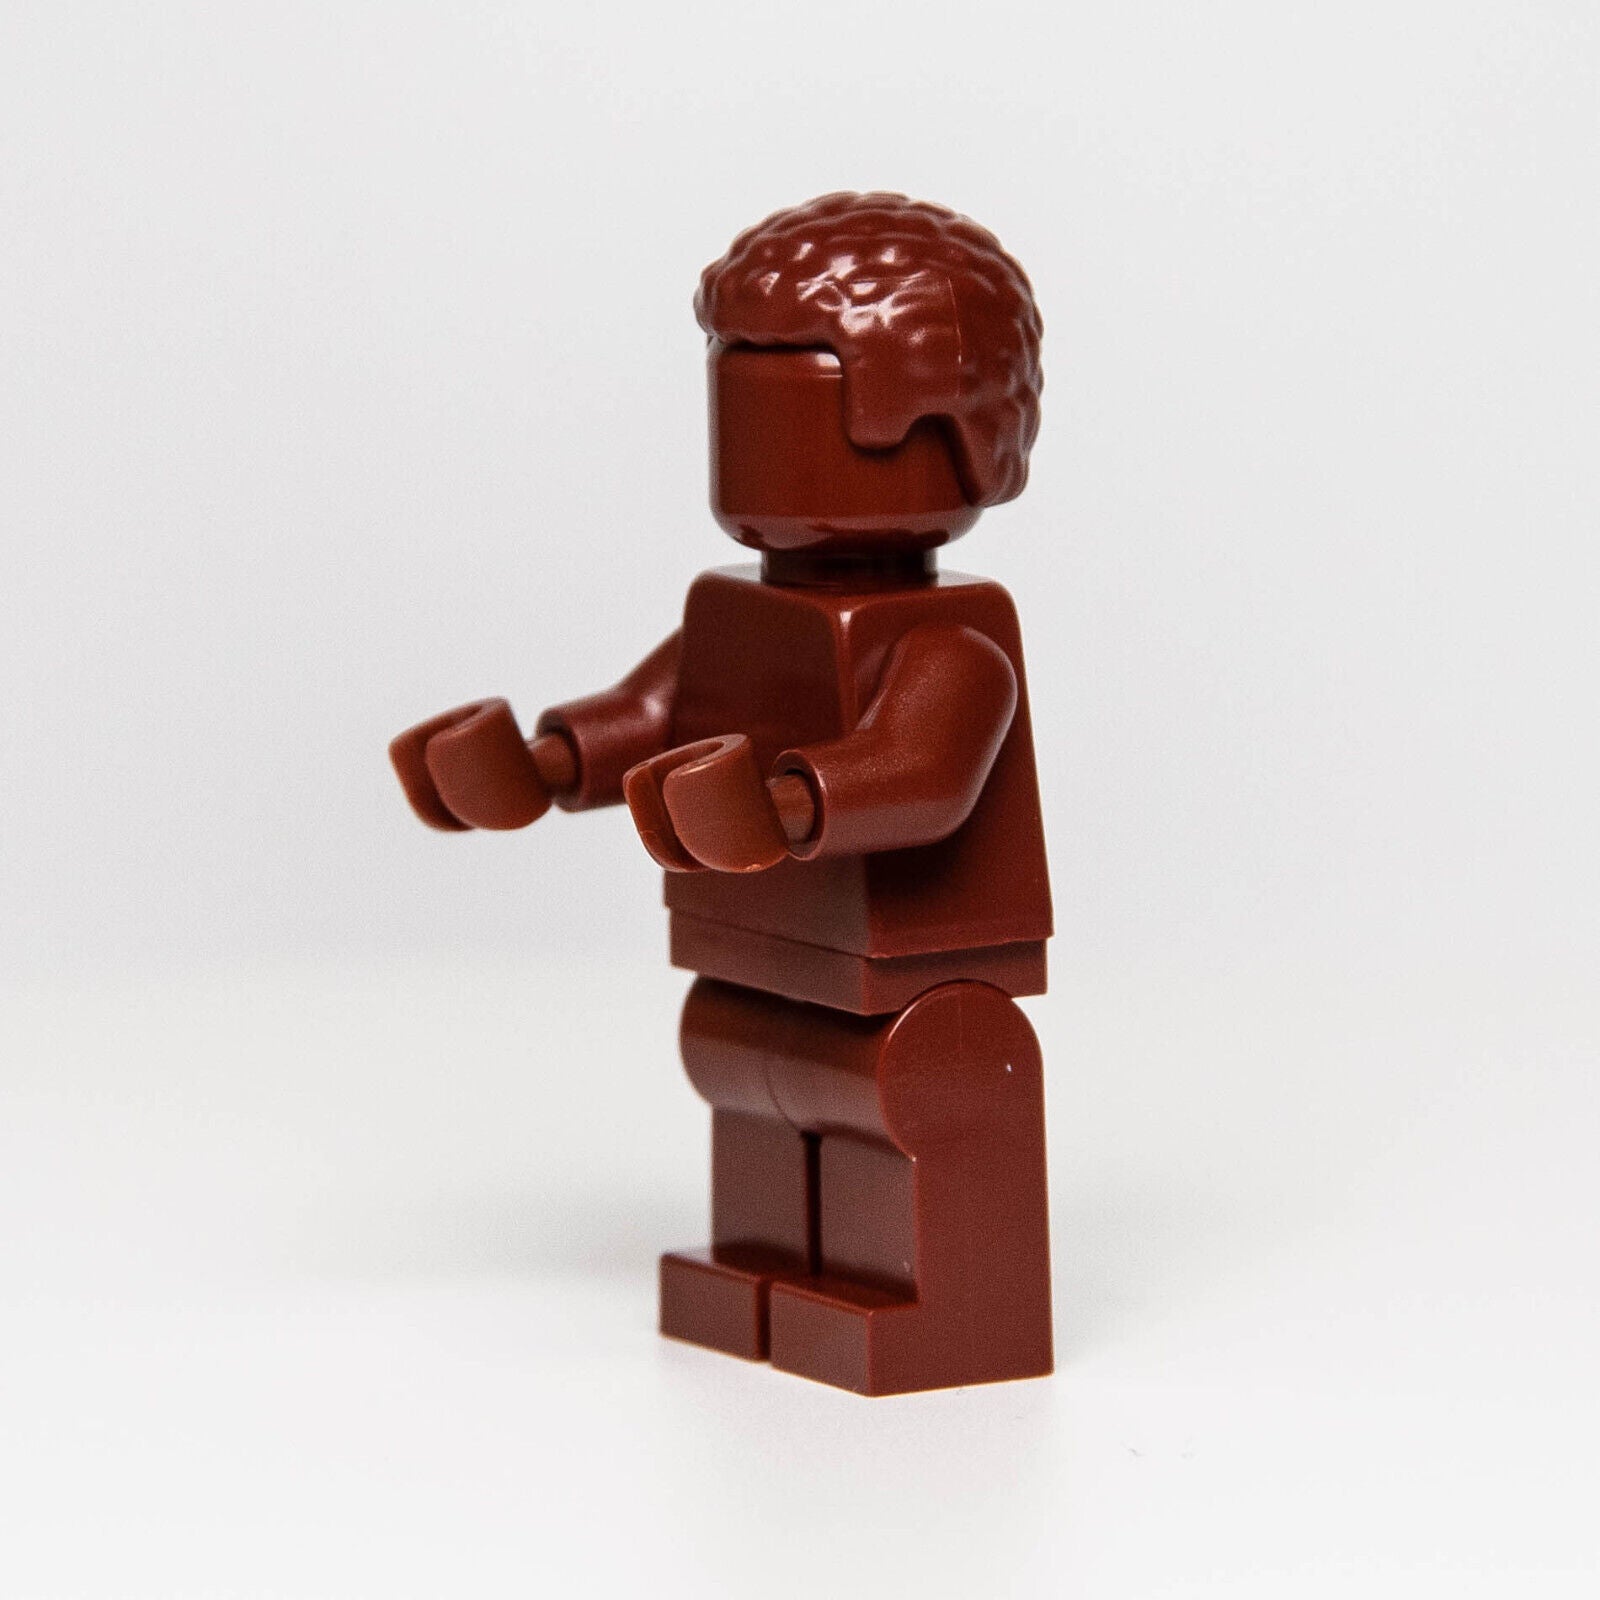 NEW LEGO Everyone is Awesome Reddish Brown Monochrome Minfigure (tls101) 40516